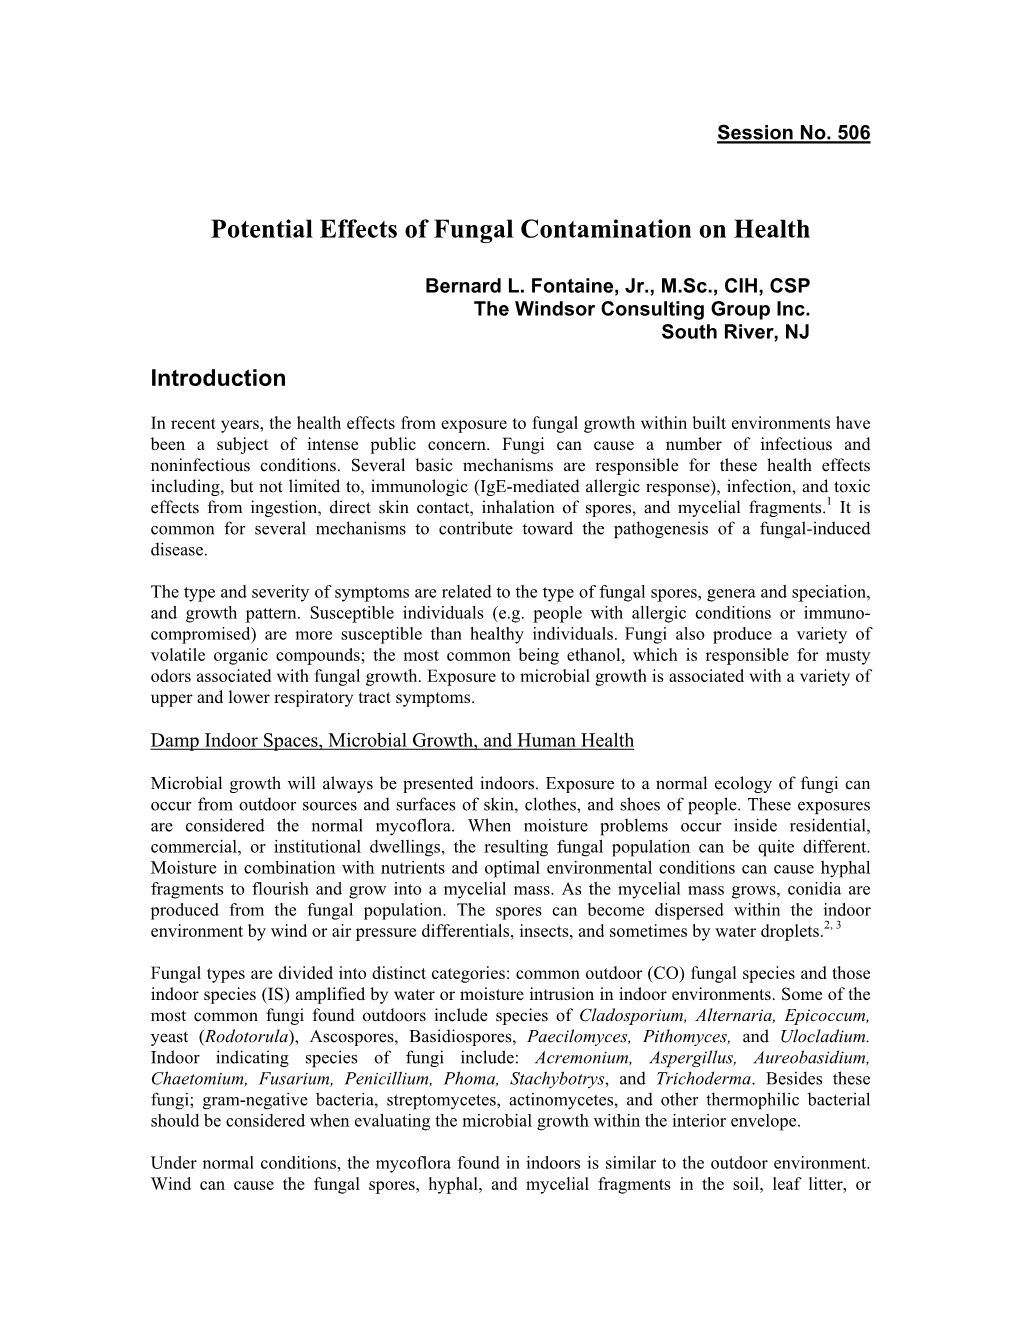 Potential Effects of Fungal Contamination on Health